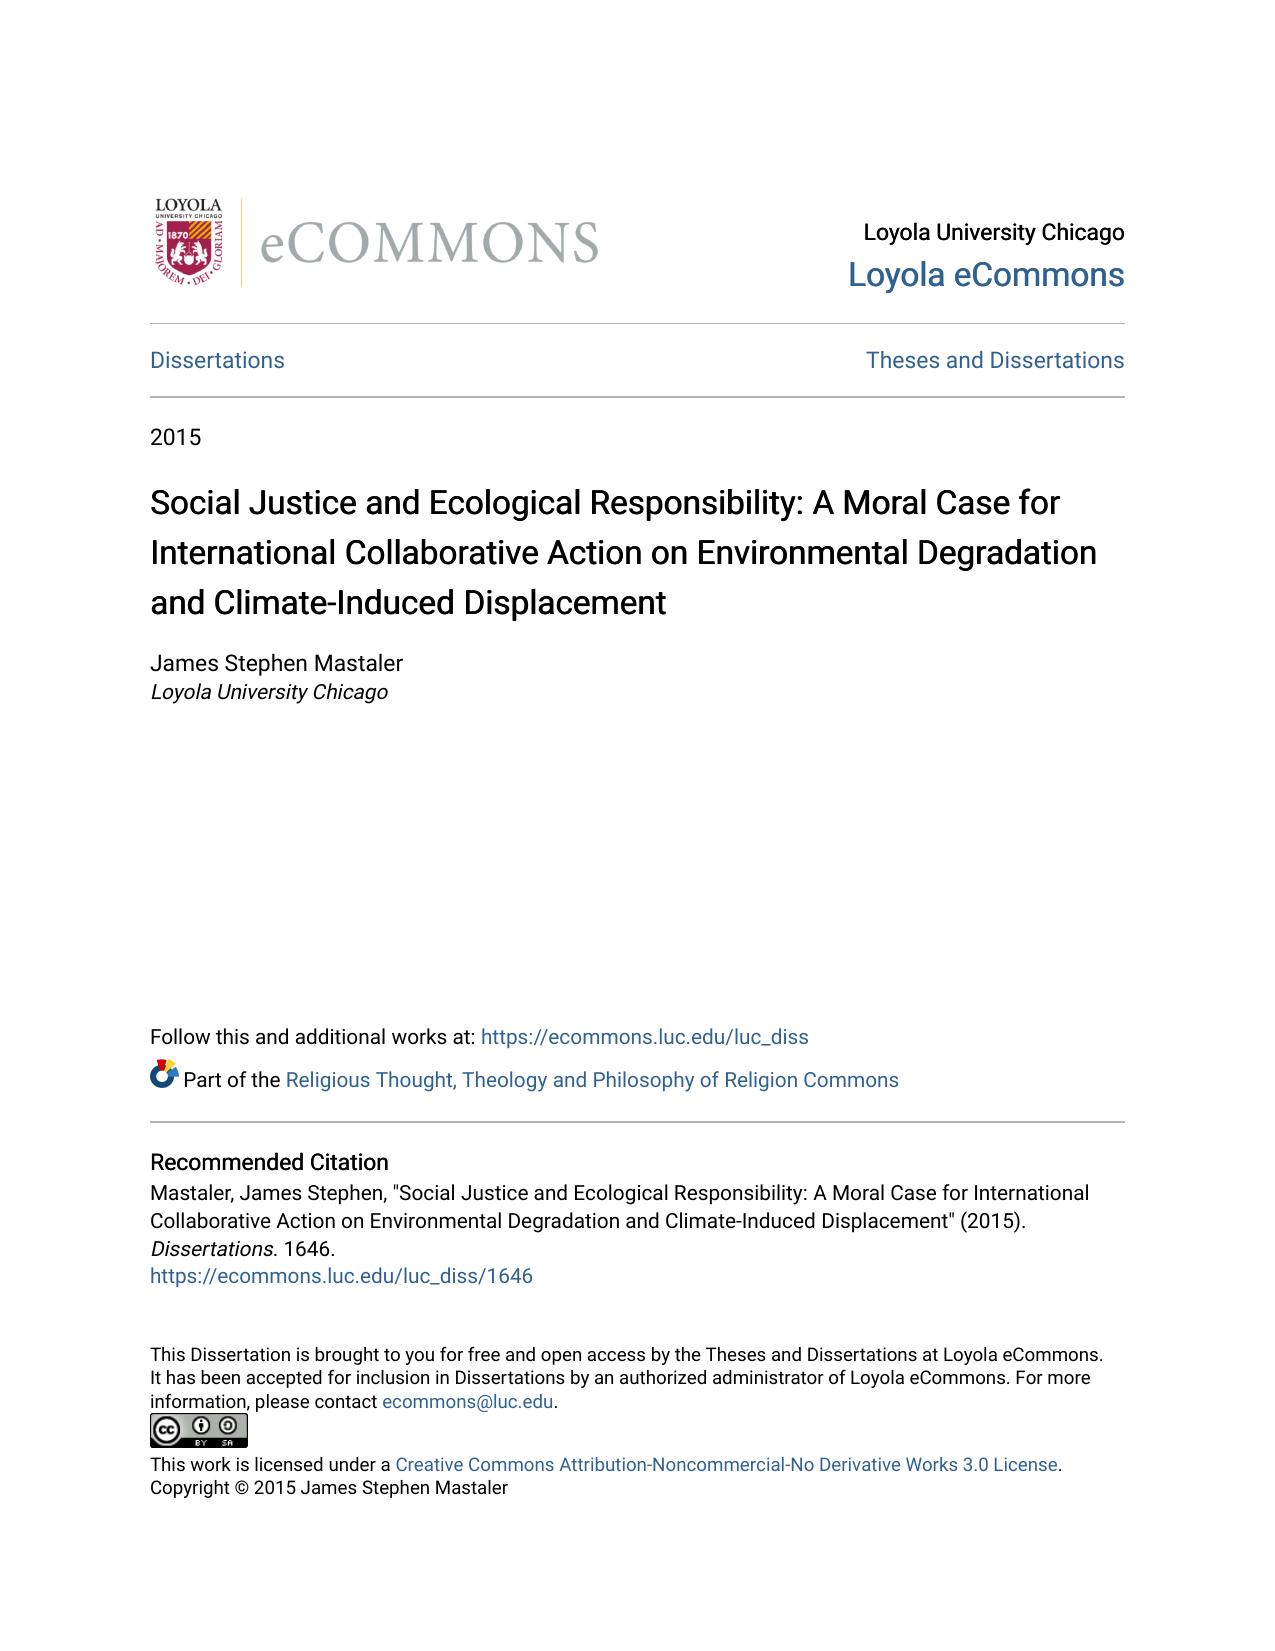 Social Justice and Ecological Responsibility: A Moral Case for International Collaborative Action on Environmental Degradation and Climate-Induced Displacement